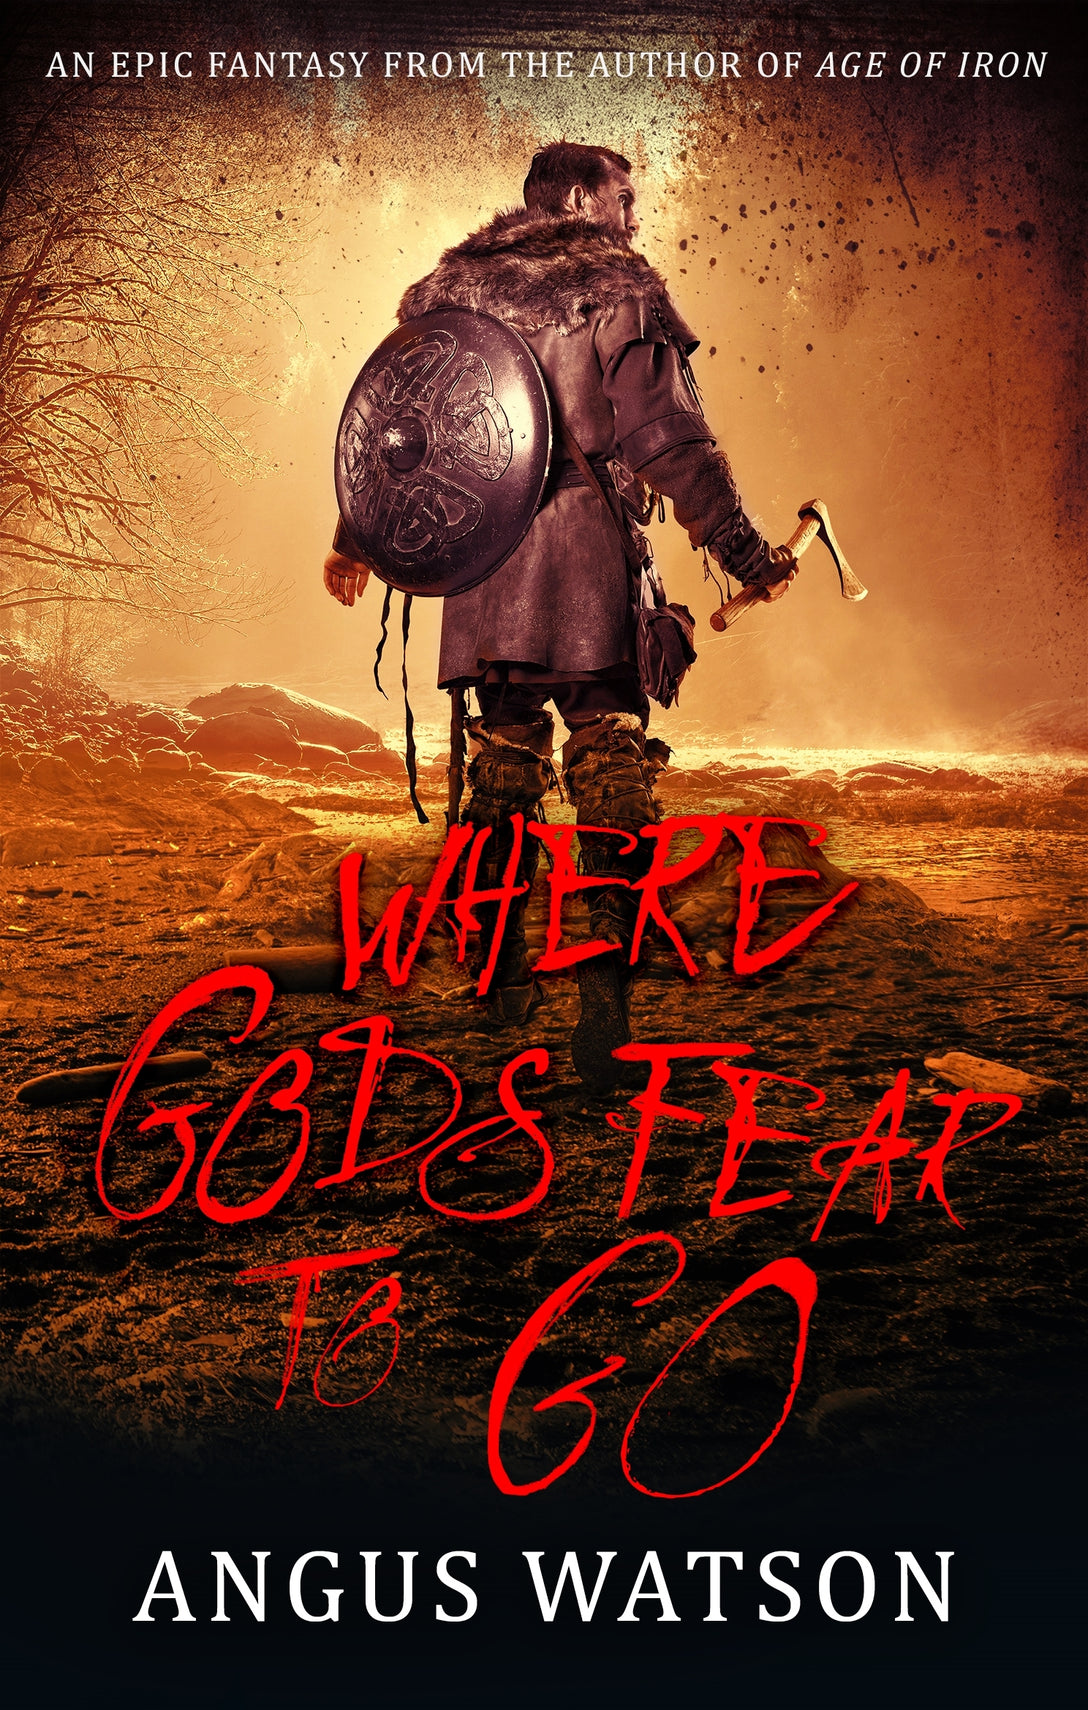 Where Gods Fear to Go by Angus Watson